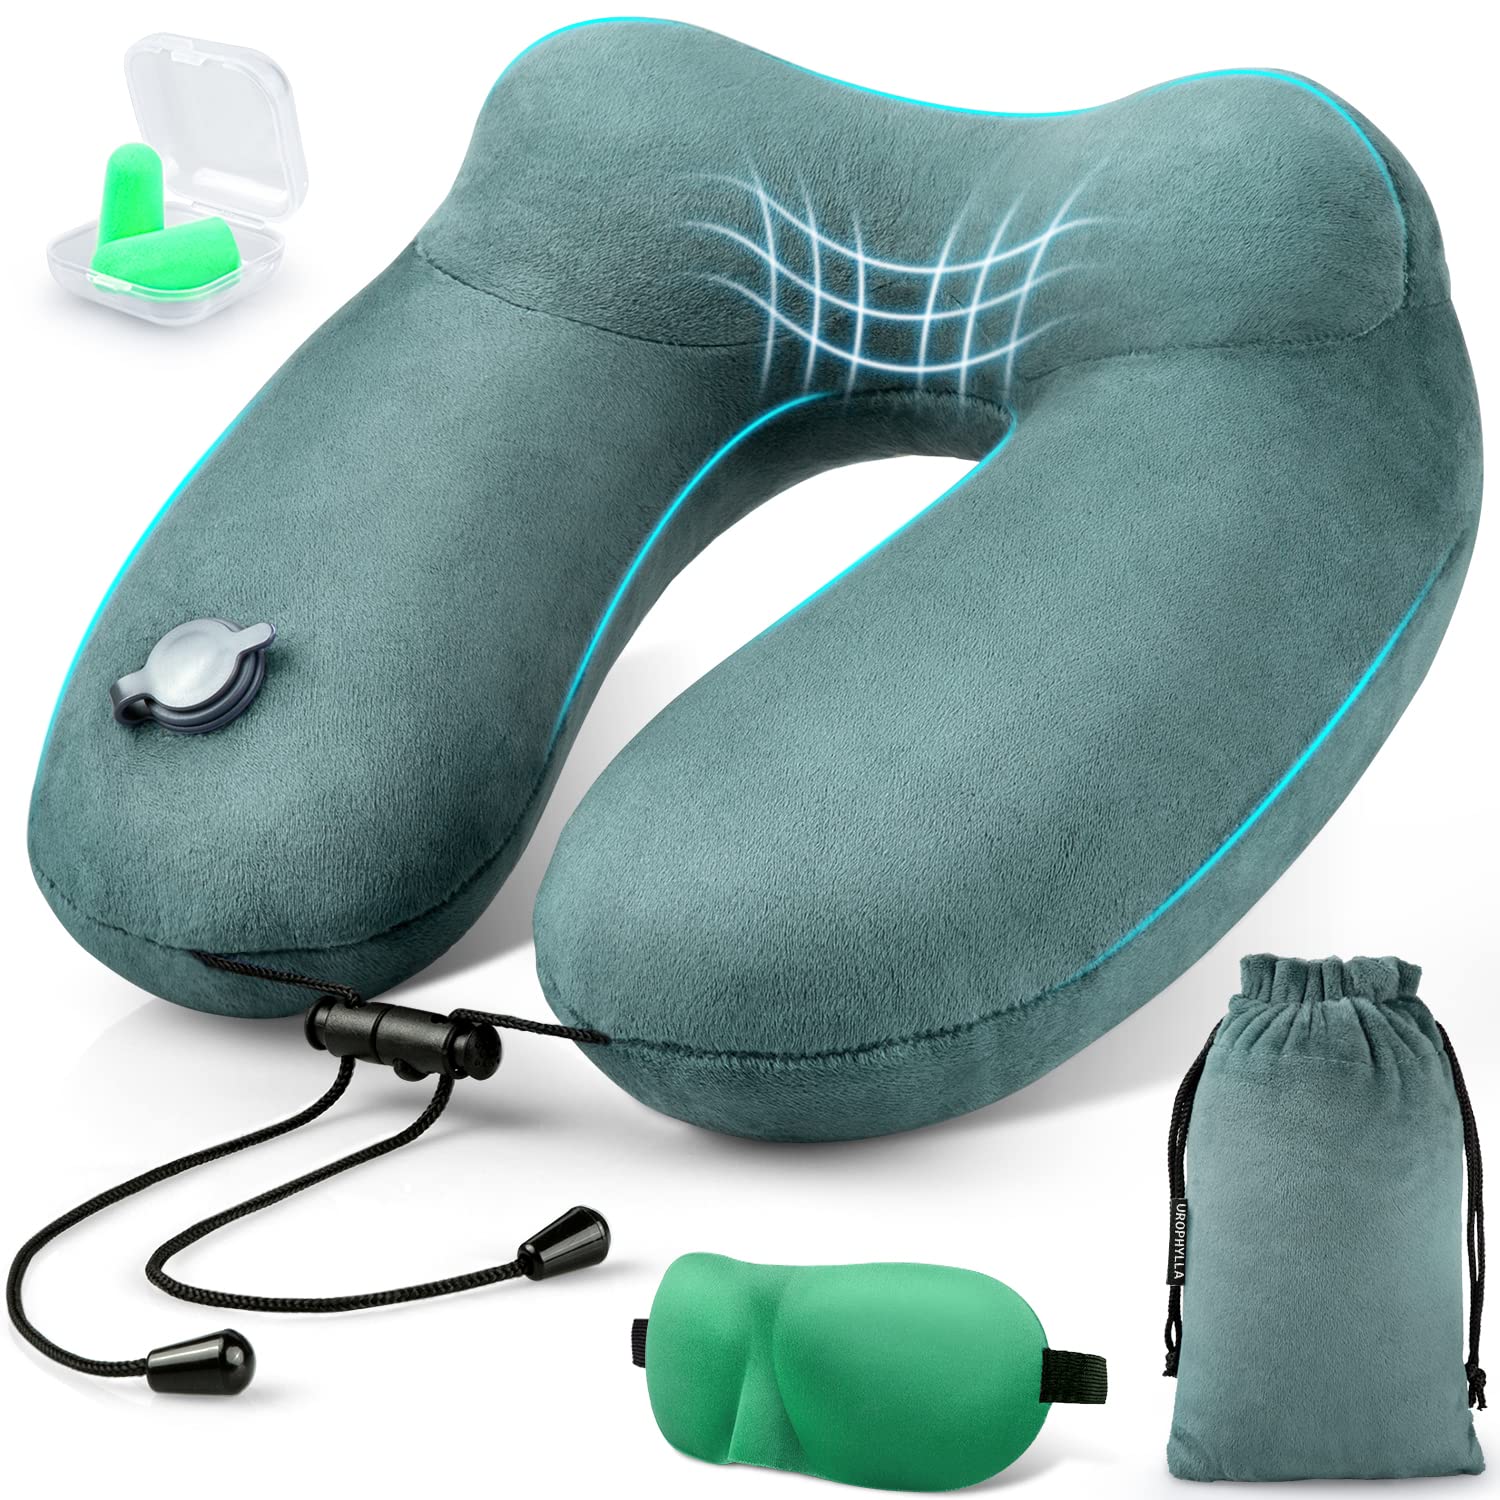 Neck Pillow for Travel, Inflatable Travel Neck Pillows for